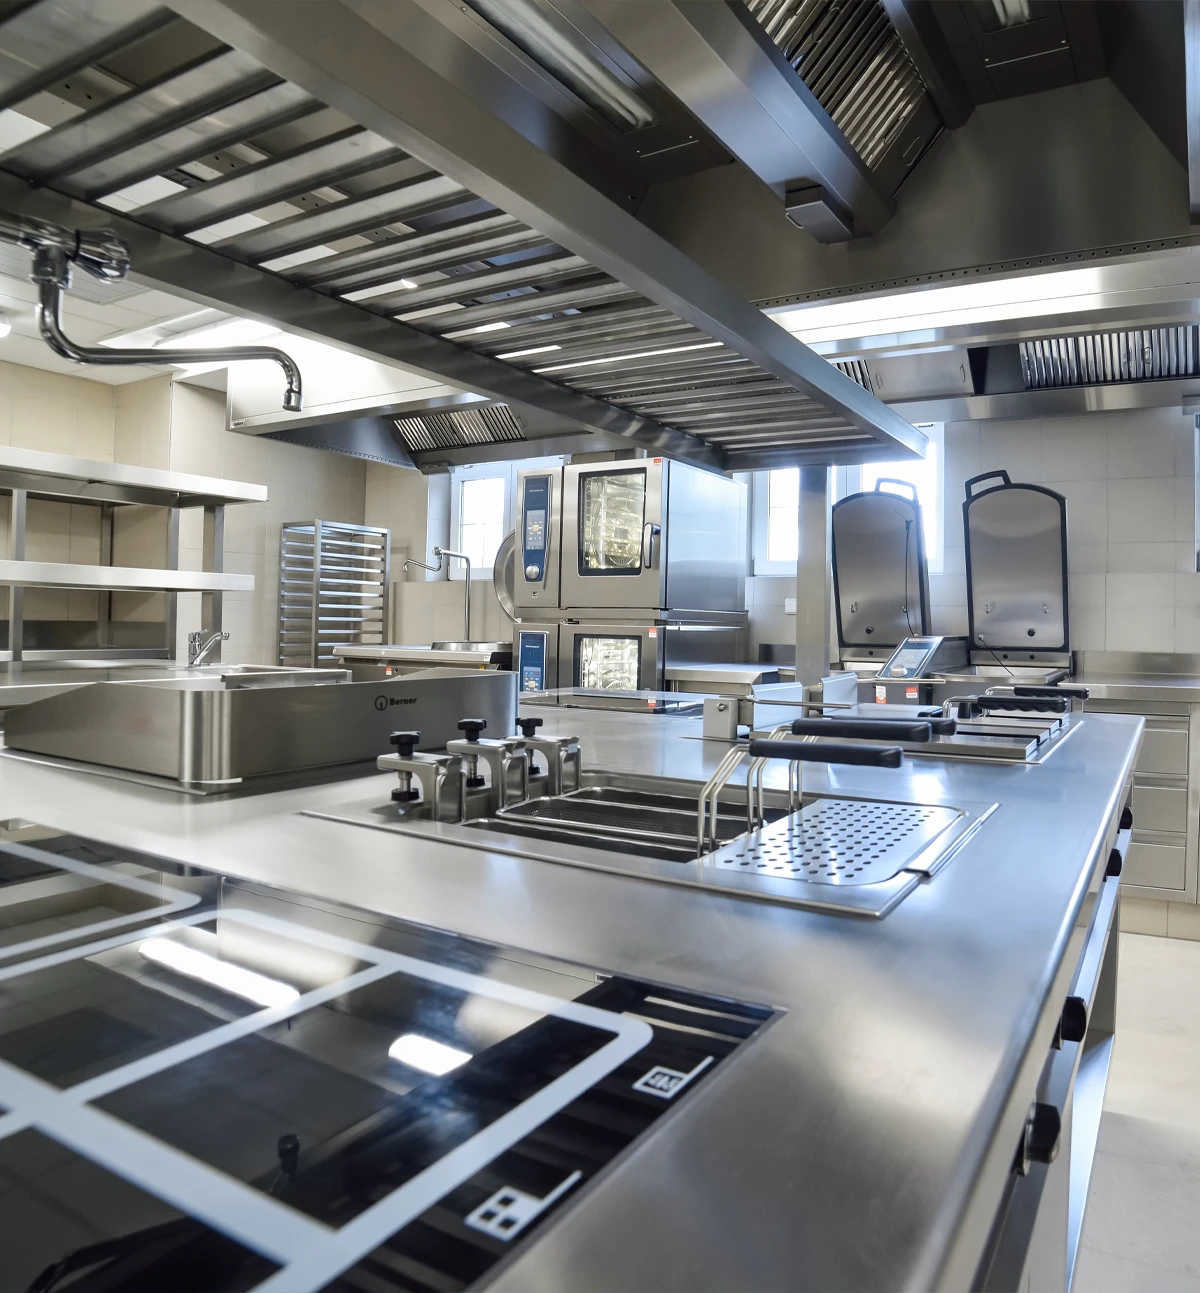 Solutions for Food Equipment and Commercial Kitchens